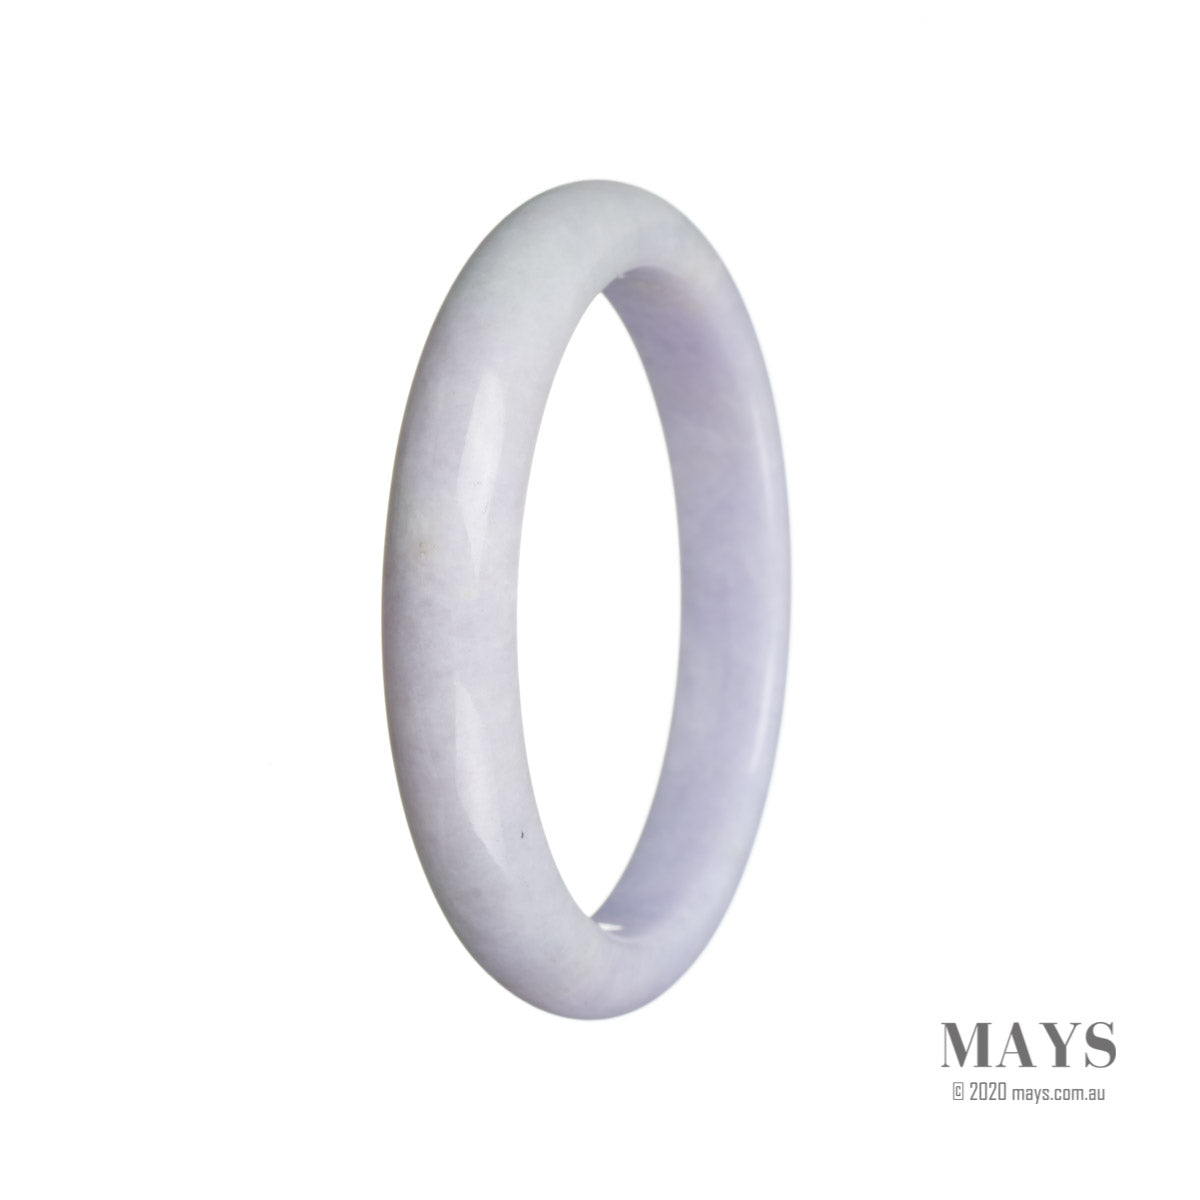 A close-up image of a lavender-colored traditional jade bangle with a semi-round shape, measuring 59mm in size. This genuine Grade A jade bangle is from MAYS GEMS.